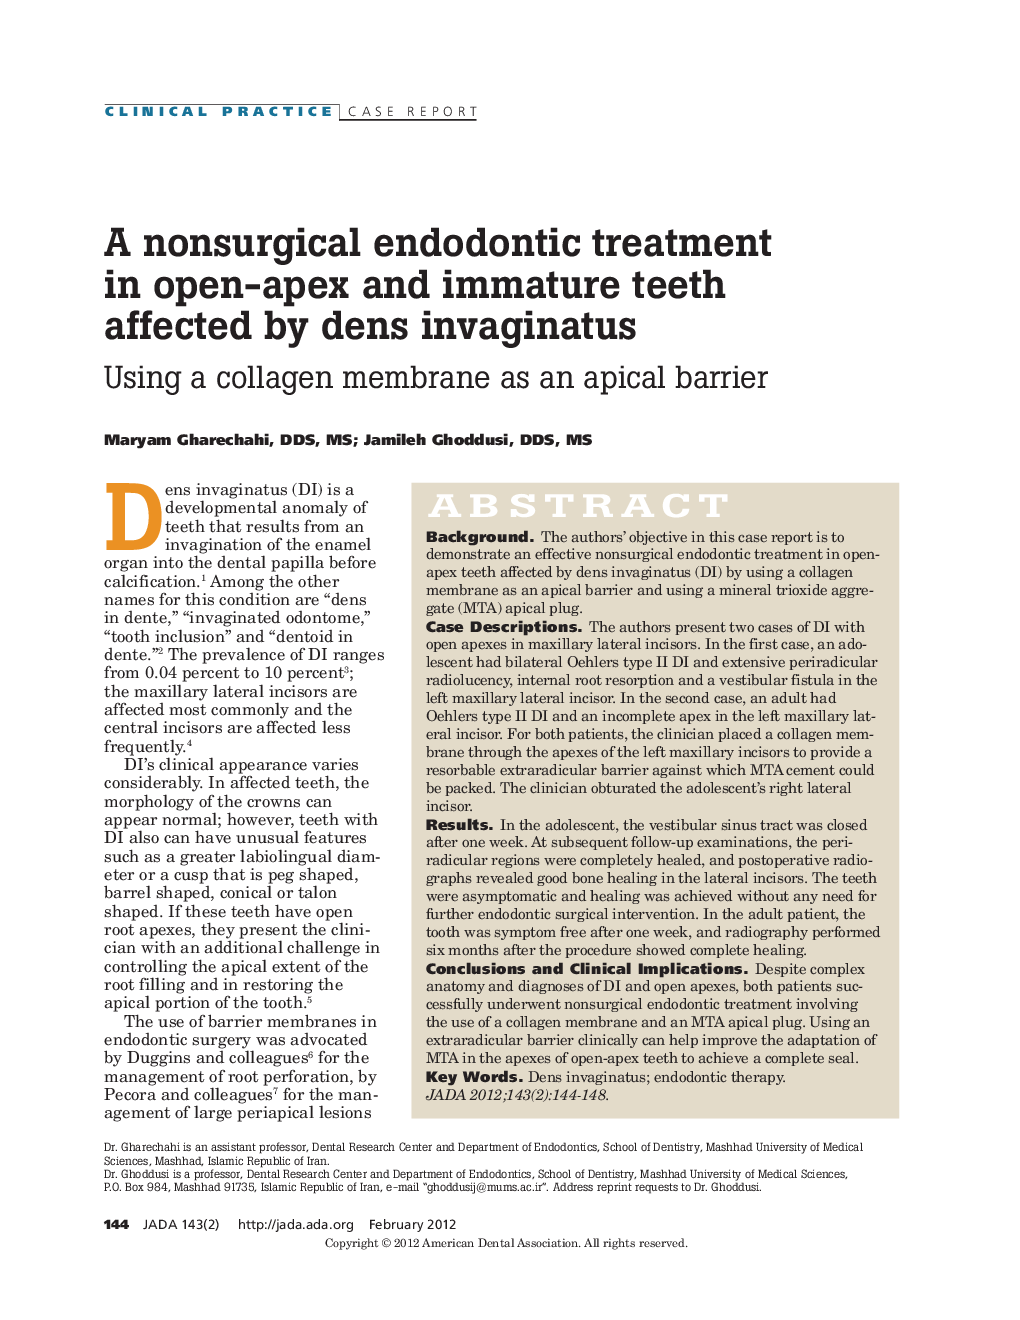 A nonsurgical endodontic treatment in open-apex and immature teeth affected by dens invaginatus : Using a collagen membrane as an apical barrier